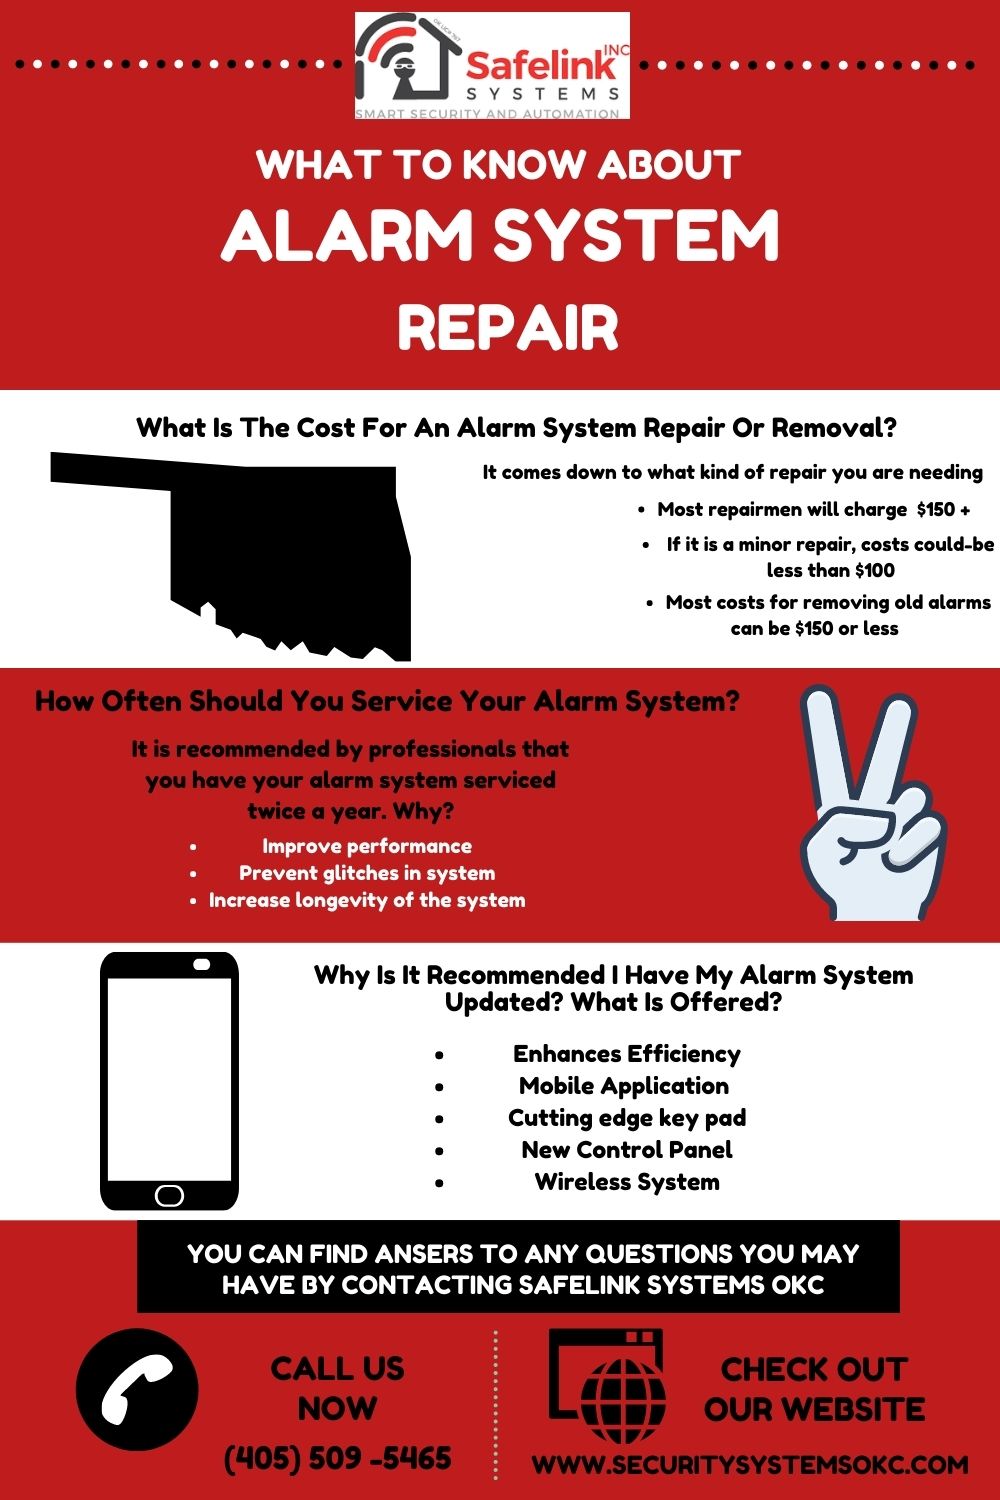 An Infographic providing common questions asked about Alarm Systems.